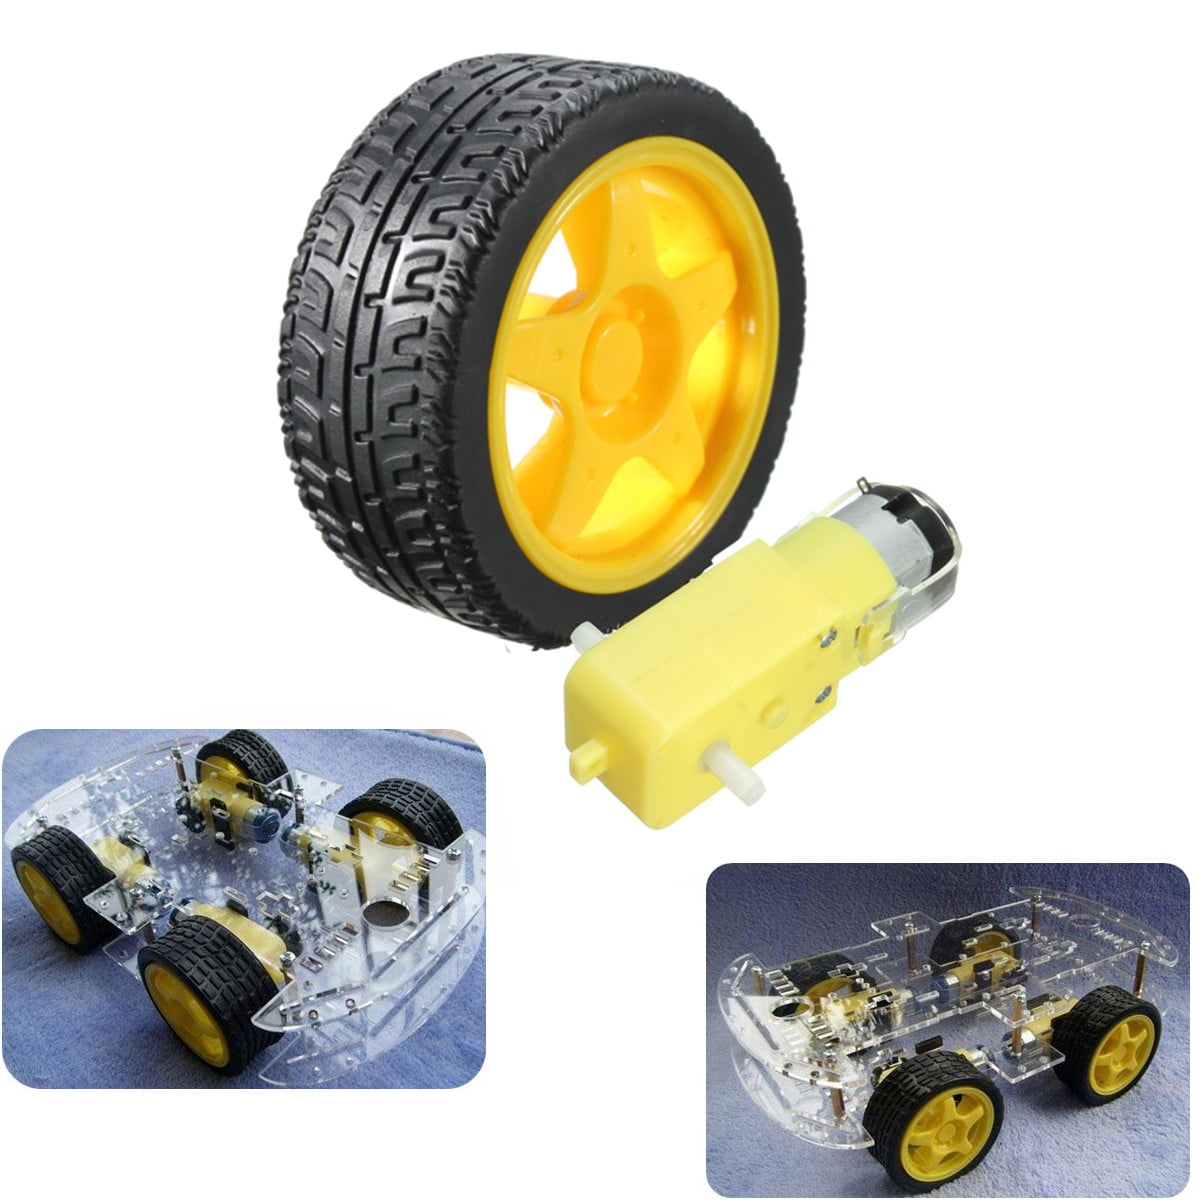 Smart Car Robot Plastic Tire Wheel with DC 3-6v Gear Motor For arduino 